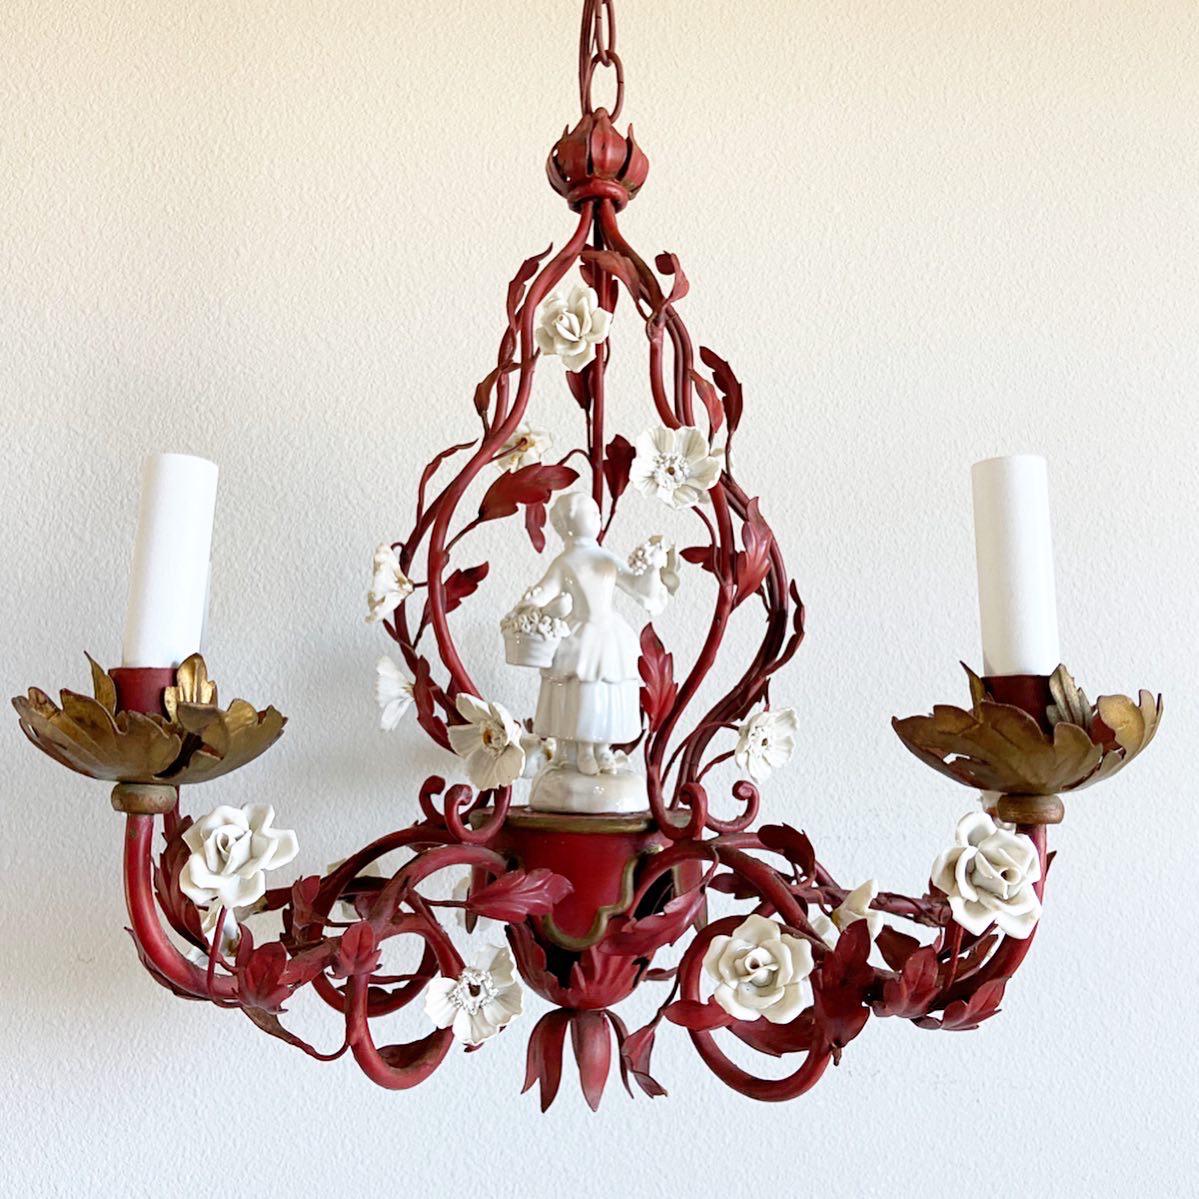 1950s-italian-red-tole-and-porcelain-chandelier-6775.jpg